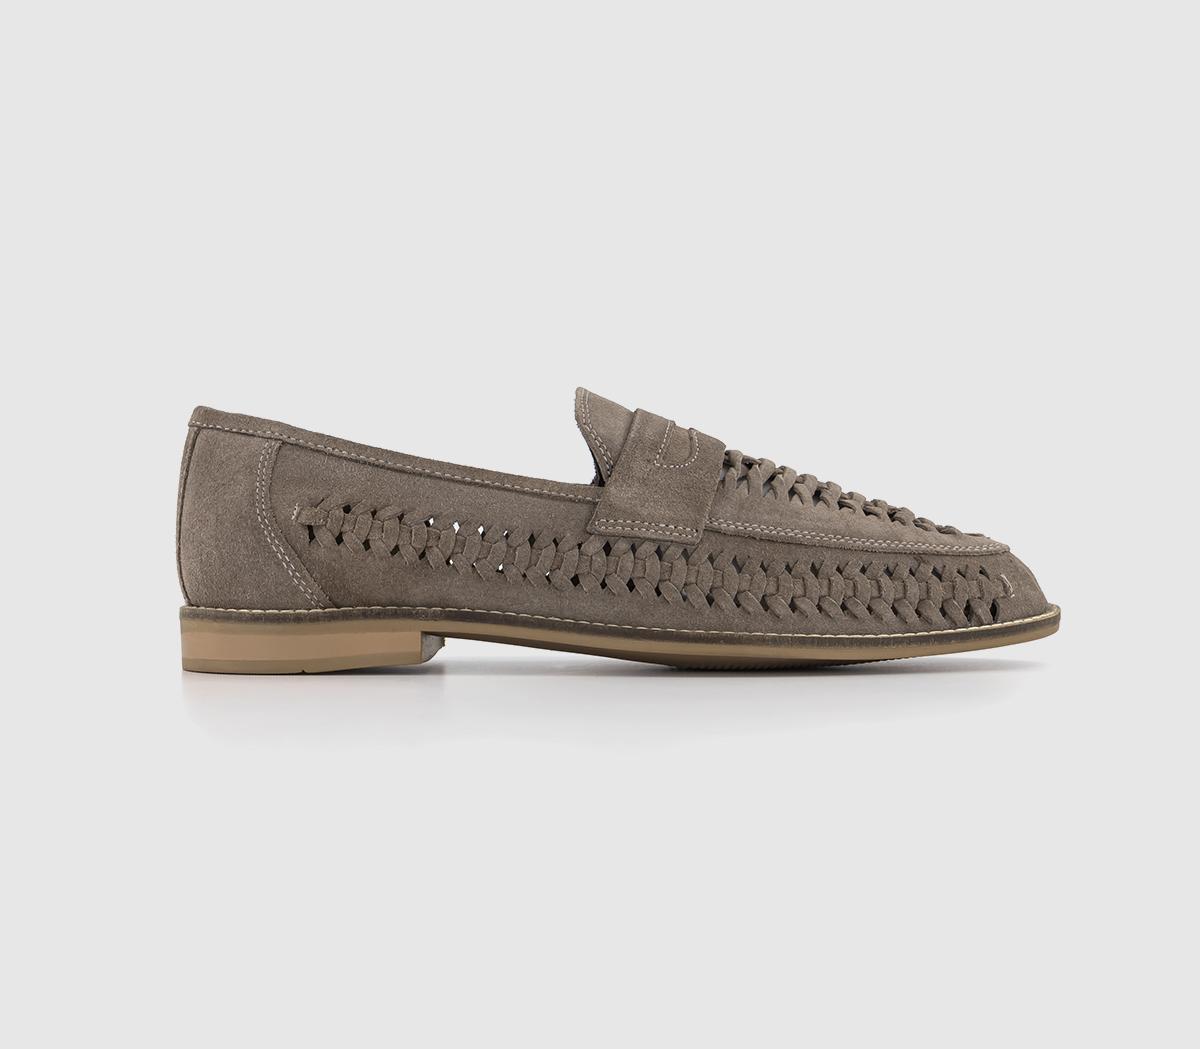 Chiswick 2 Woven Saddle Shoes Stone Suede